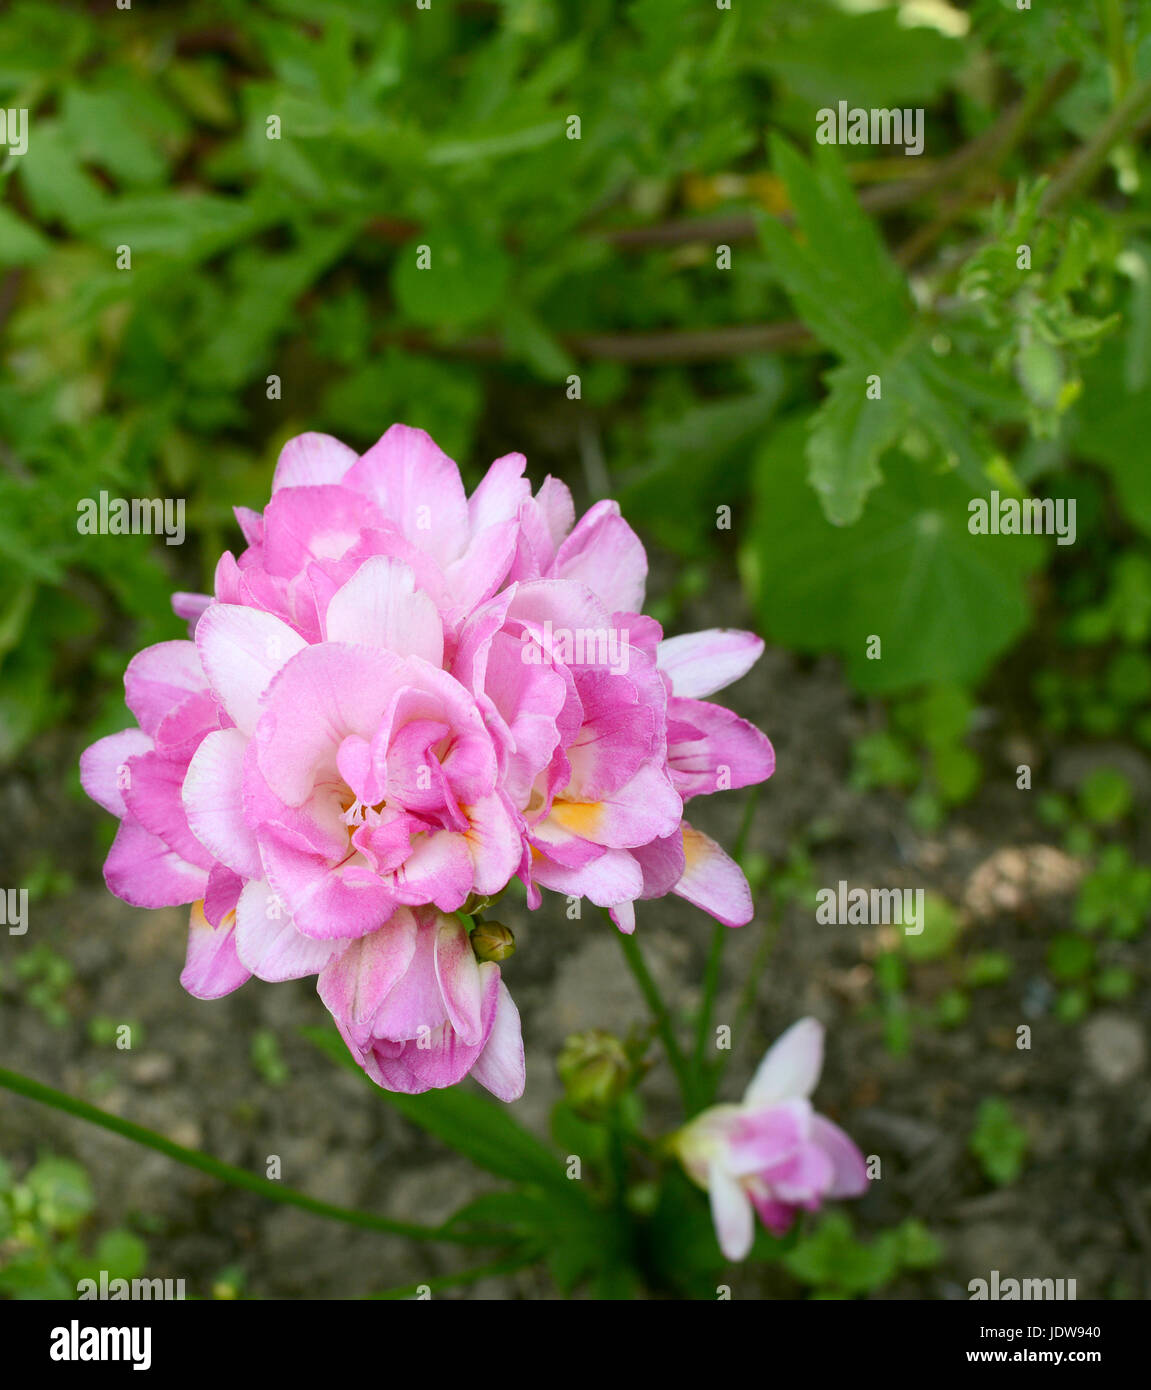 Pretty pink freesia growing in a flower bed with lush foliage beyond Stock Photo